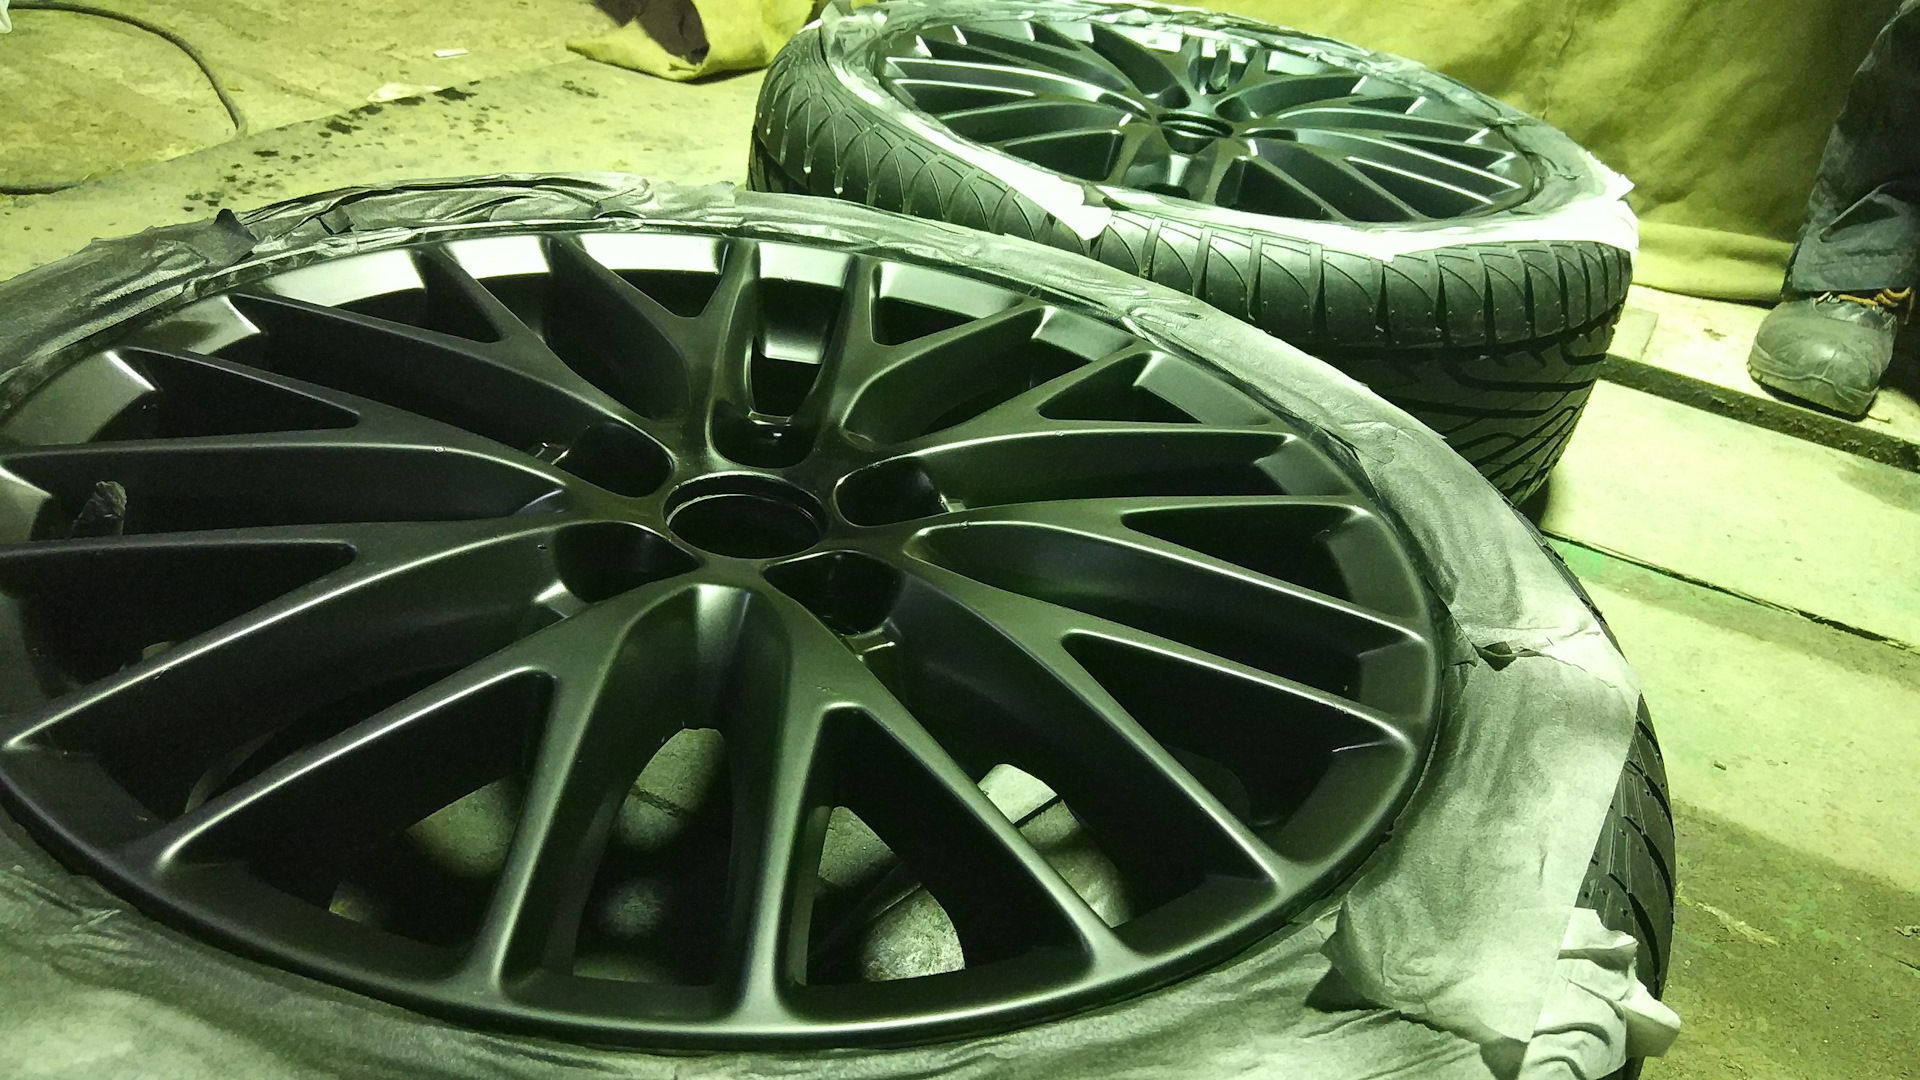 Maxxis 225/45r17 ma-z3. Ford Focus r17 225/45. Резина 225 45 17 на Форд фокус 3. Покрышки r17 225/45 Форд фокус 2. Купить шины фокус